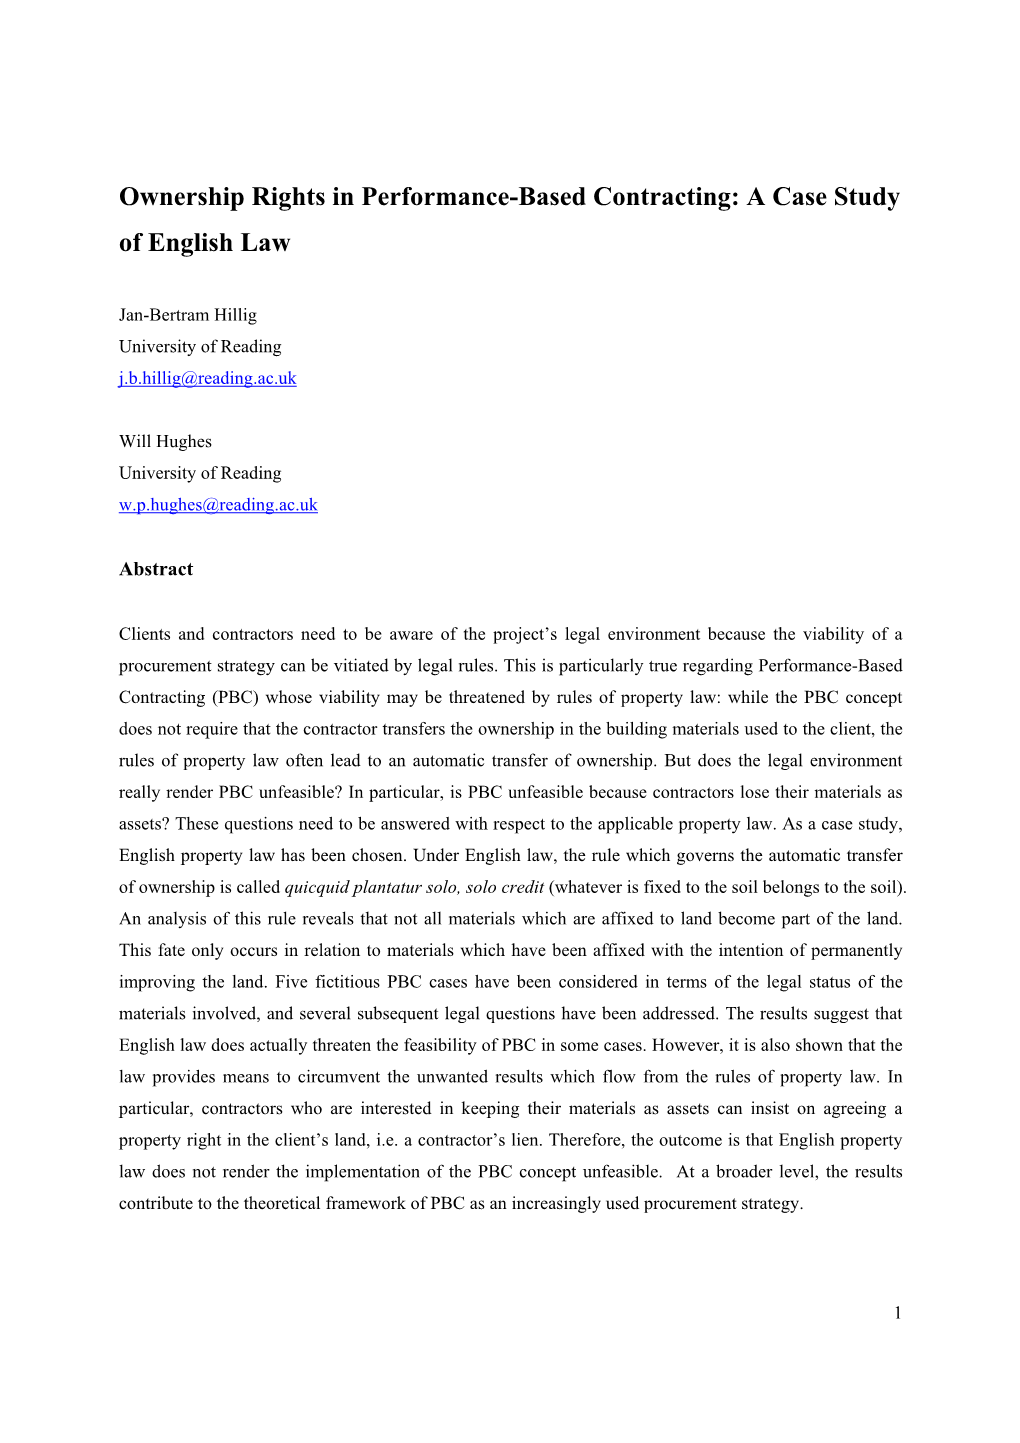 Ownership Rights in Performance-Based Contracting: a Case Study of English Law